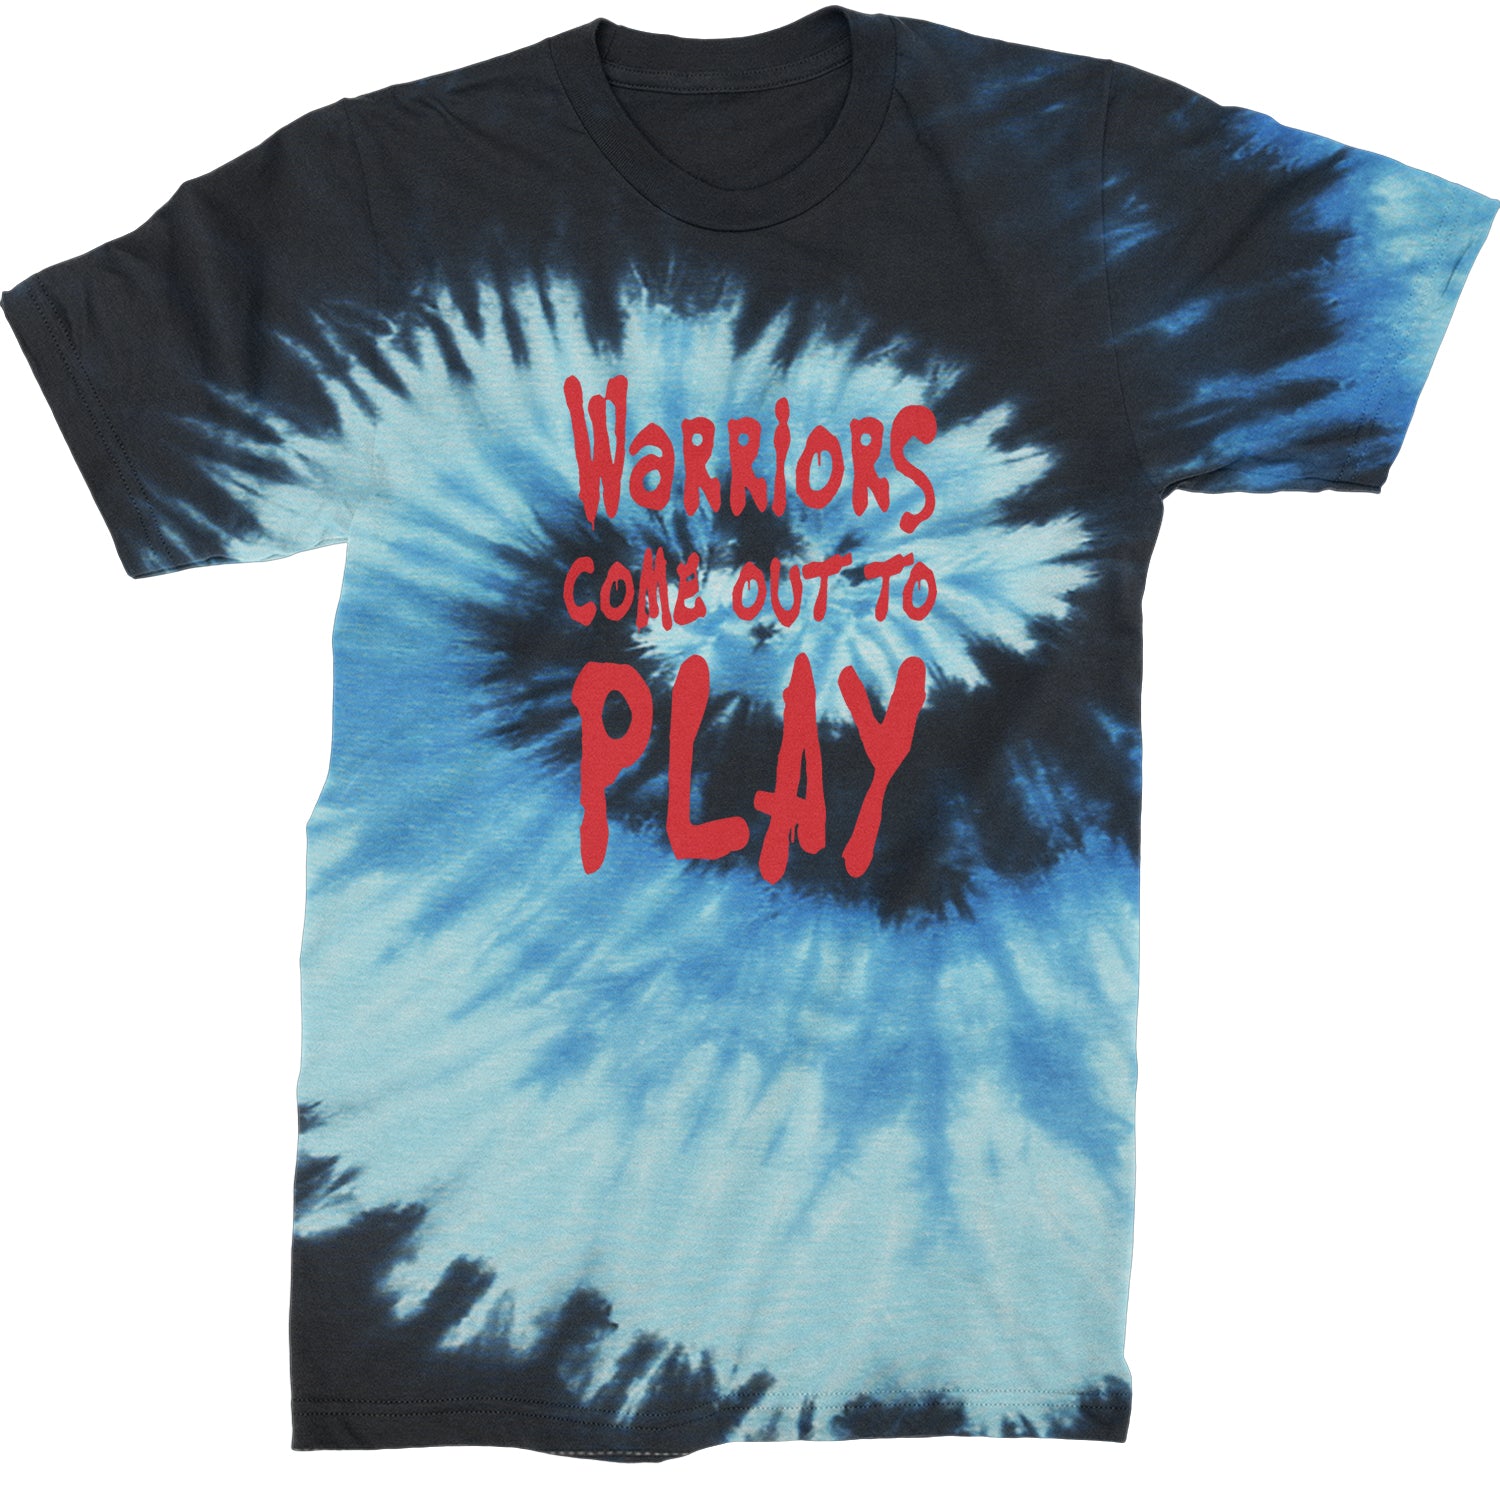 Warriors Come Out To Play  Mens T-shirt Tie-Dye Blue Ocean